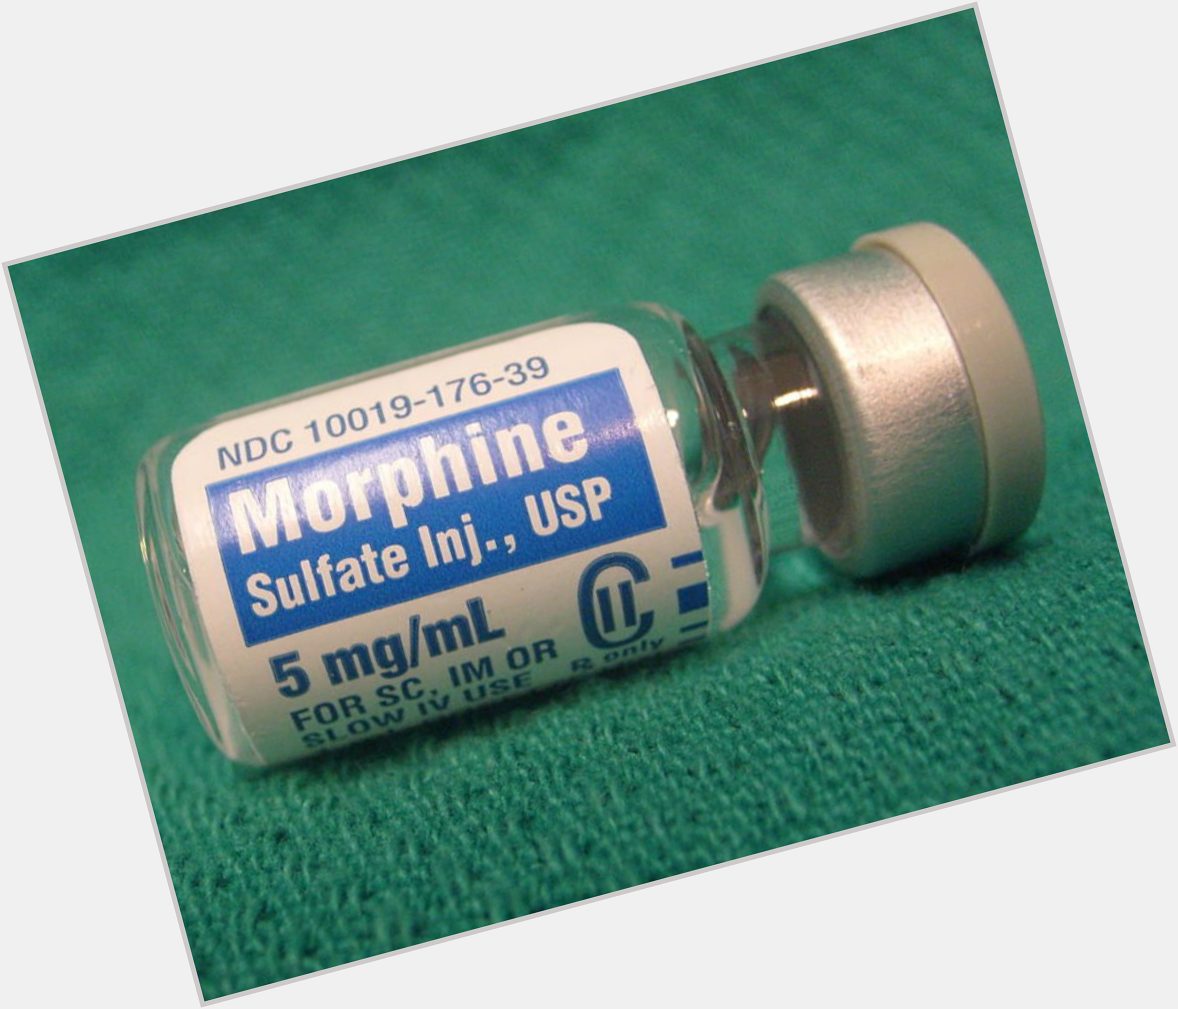 <a href="/hot-men/morphine/is-he-narcotic-opiate-stimulant-stronger-percocet-opioid">Morphine</a>  